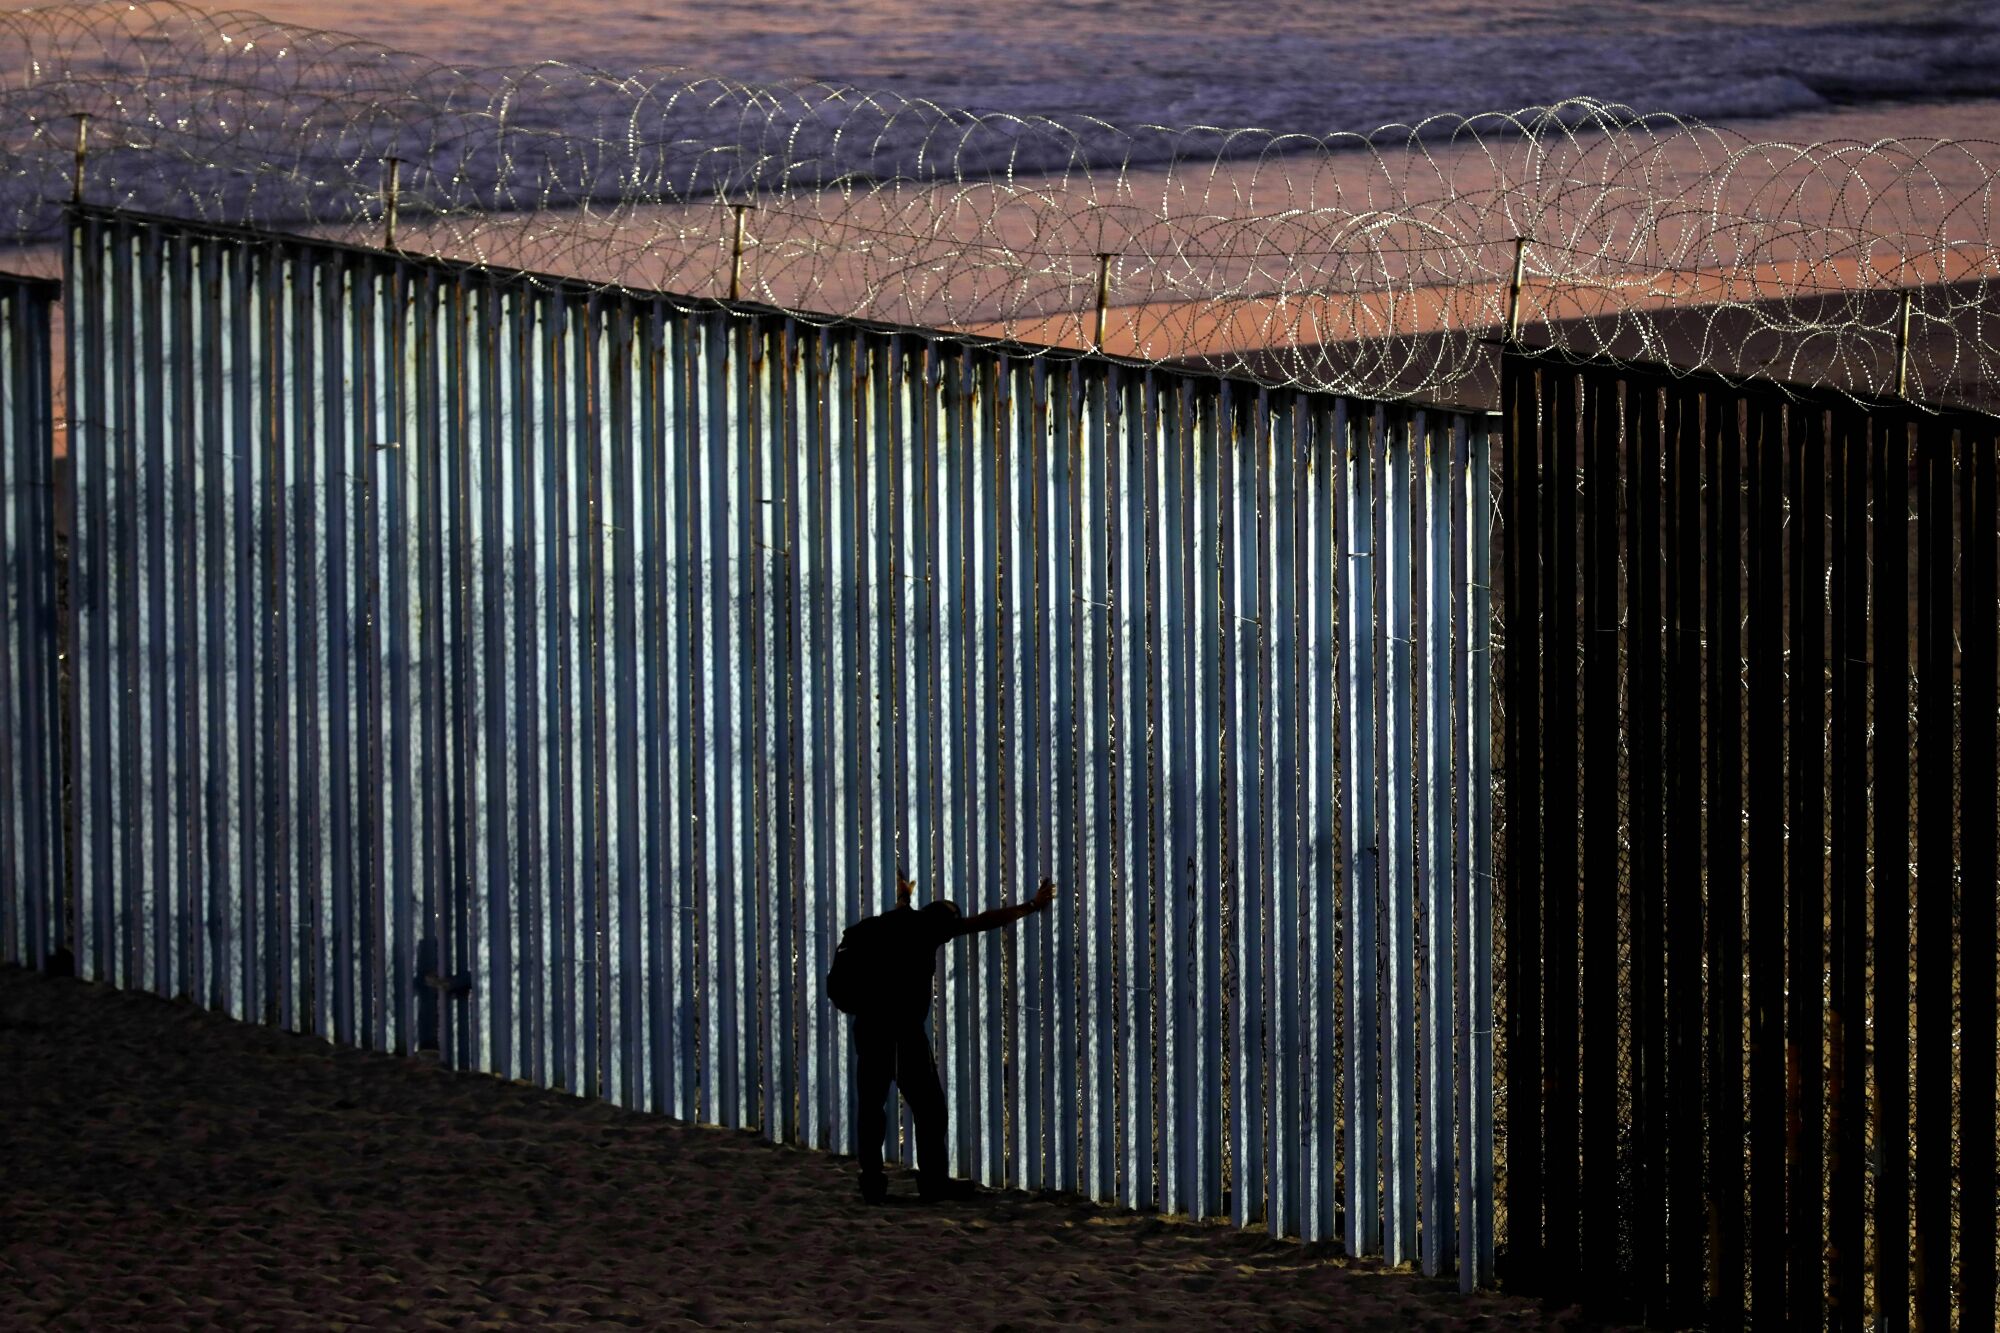 A person leans against the U.S.-Mexico border wall in Tijuana.